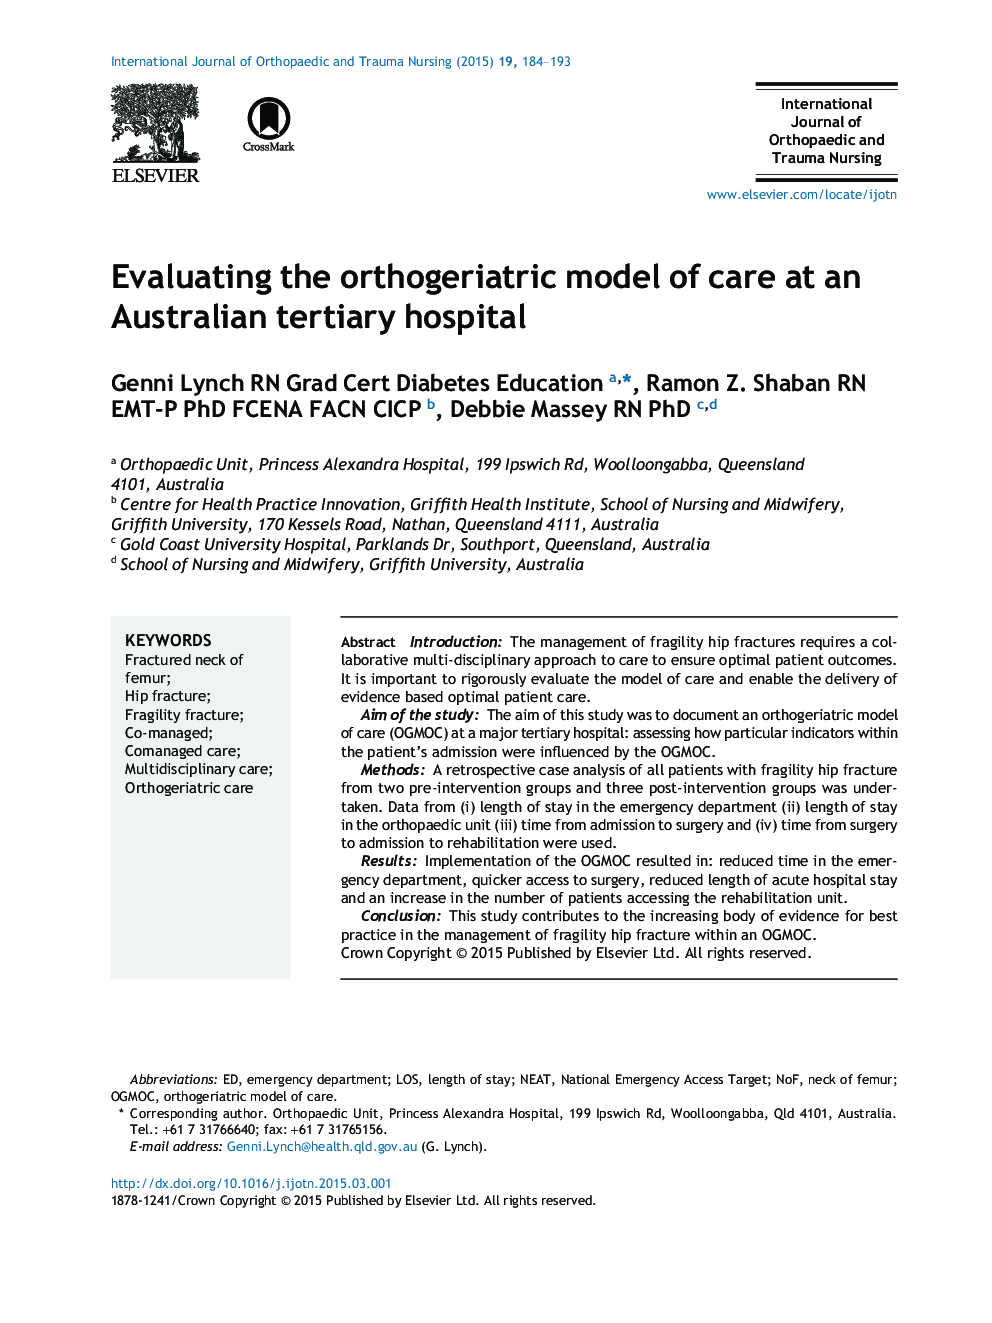 Evaluating the orthogeriatric model of care at an Australian tertiary hospital